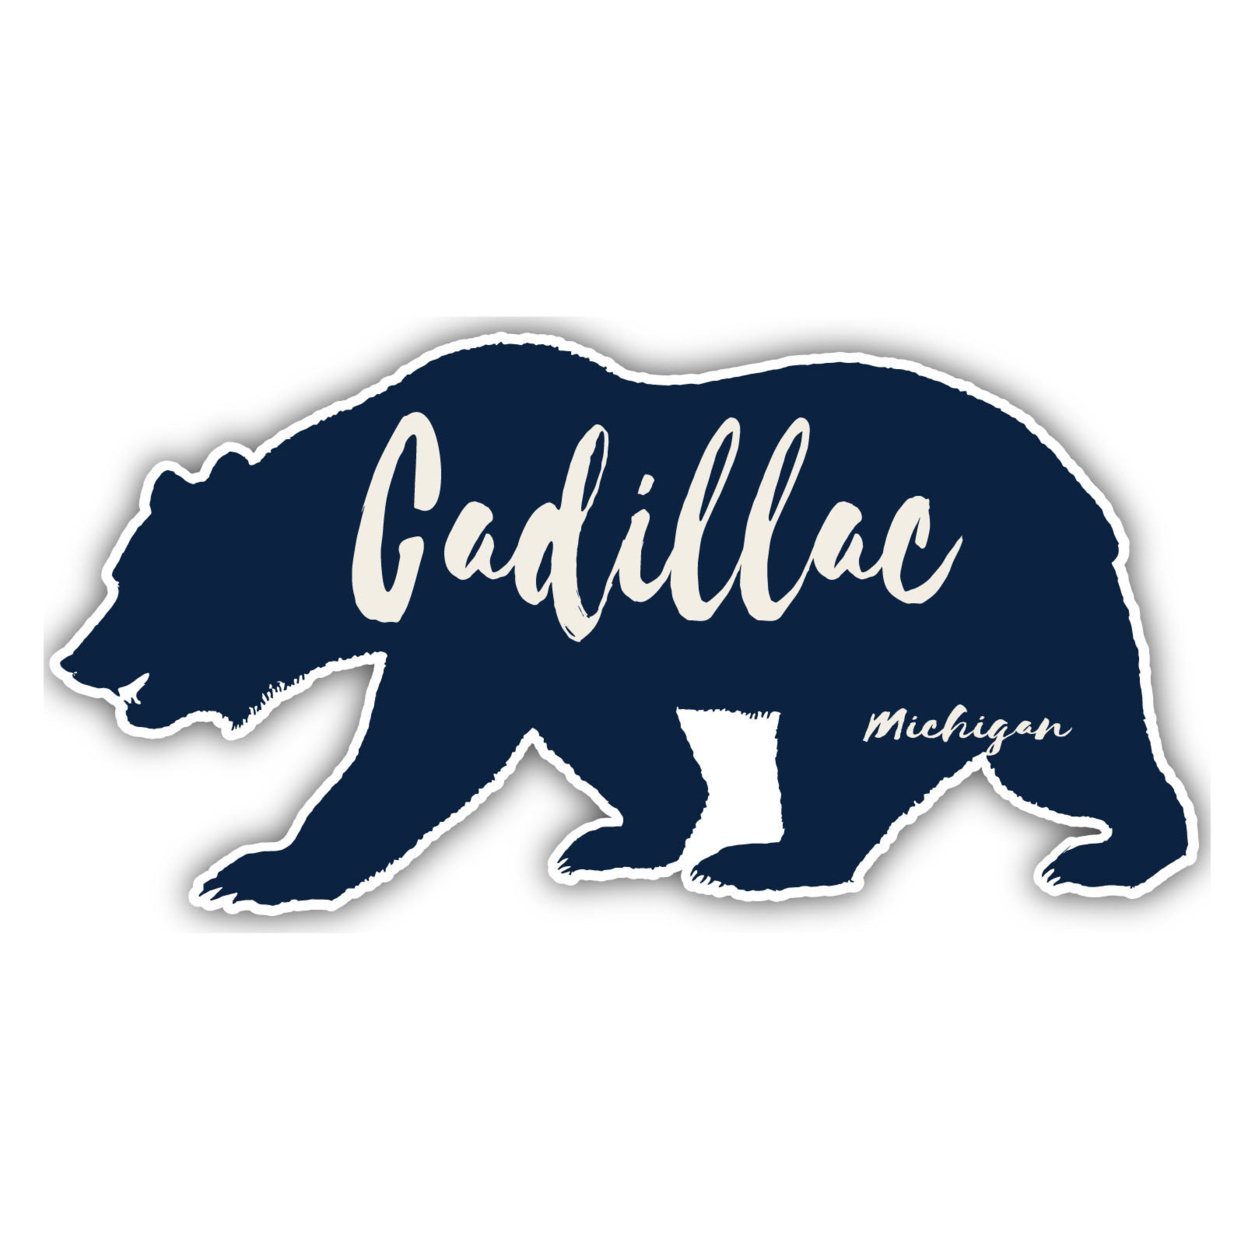 Cadillac Michigan Souvenir Decorative Stickers (Choose Theme And Size) - 4-Pack, 8-Inch, Great Outdoors